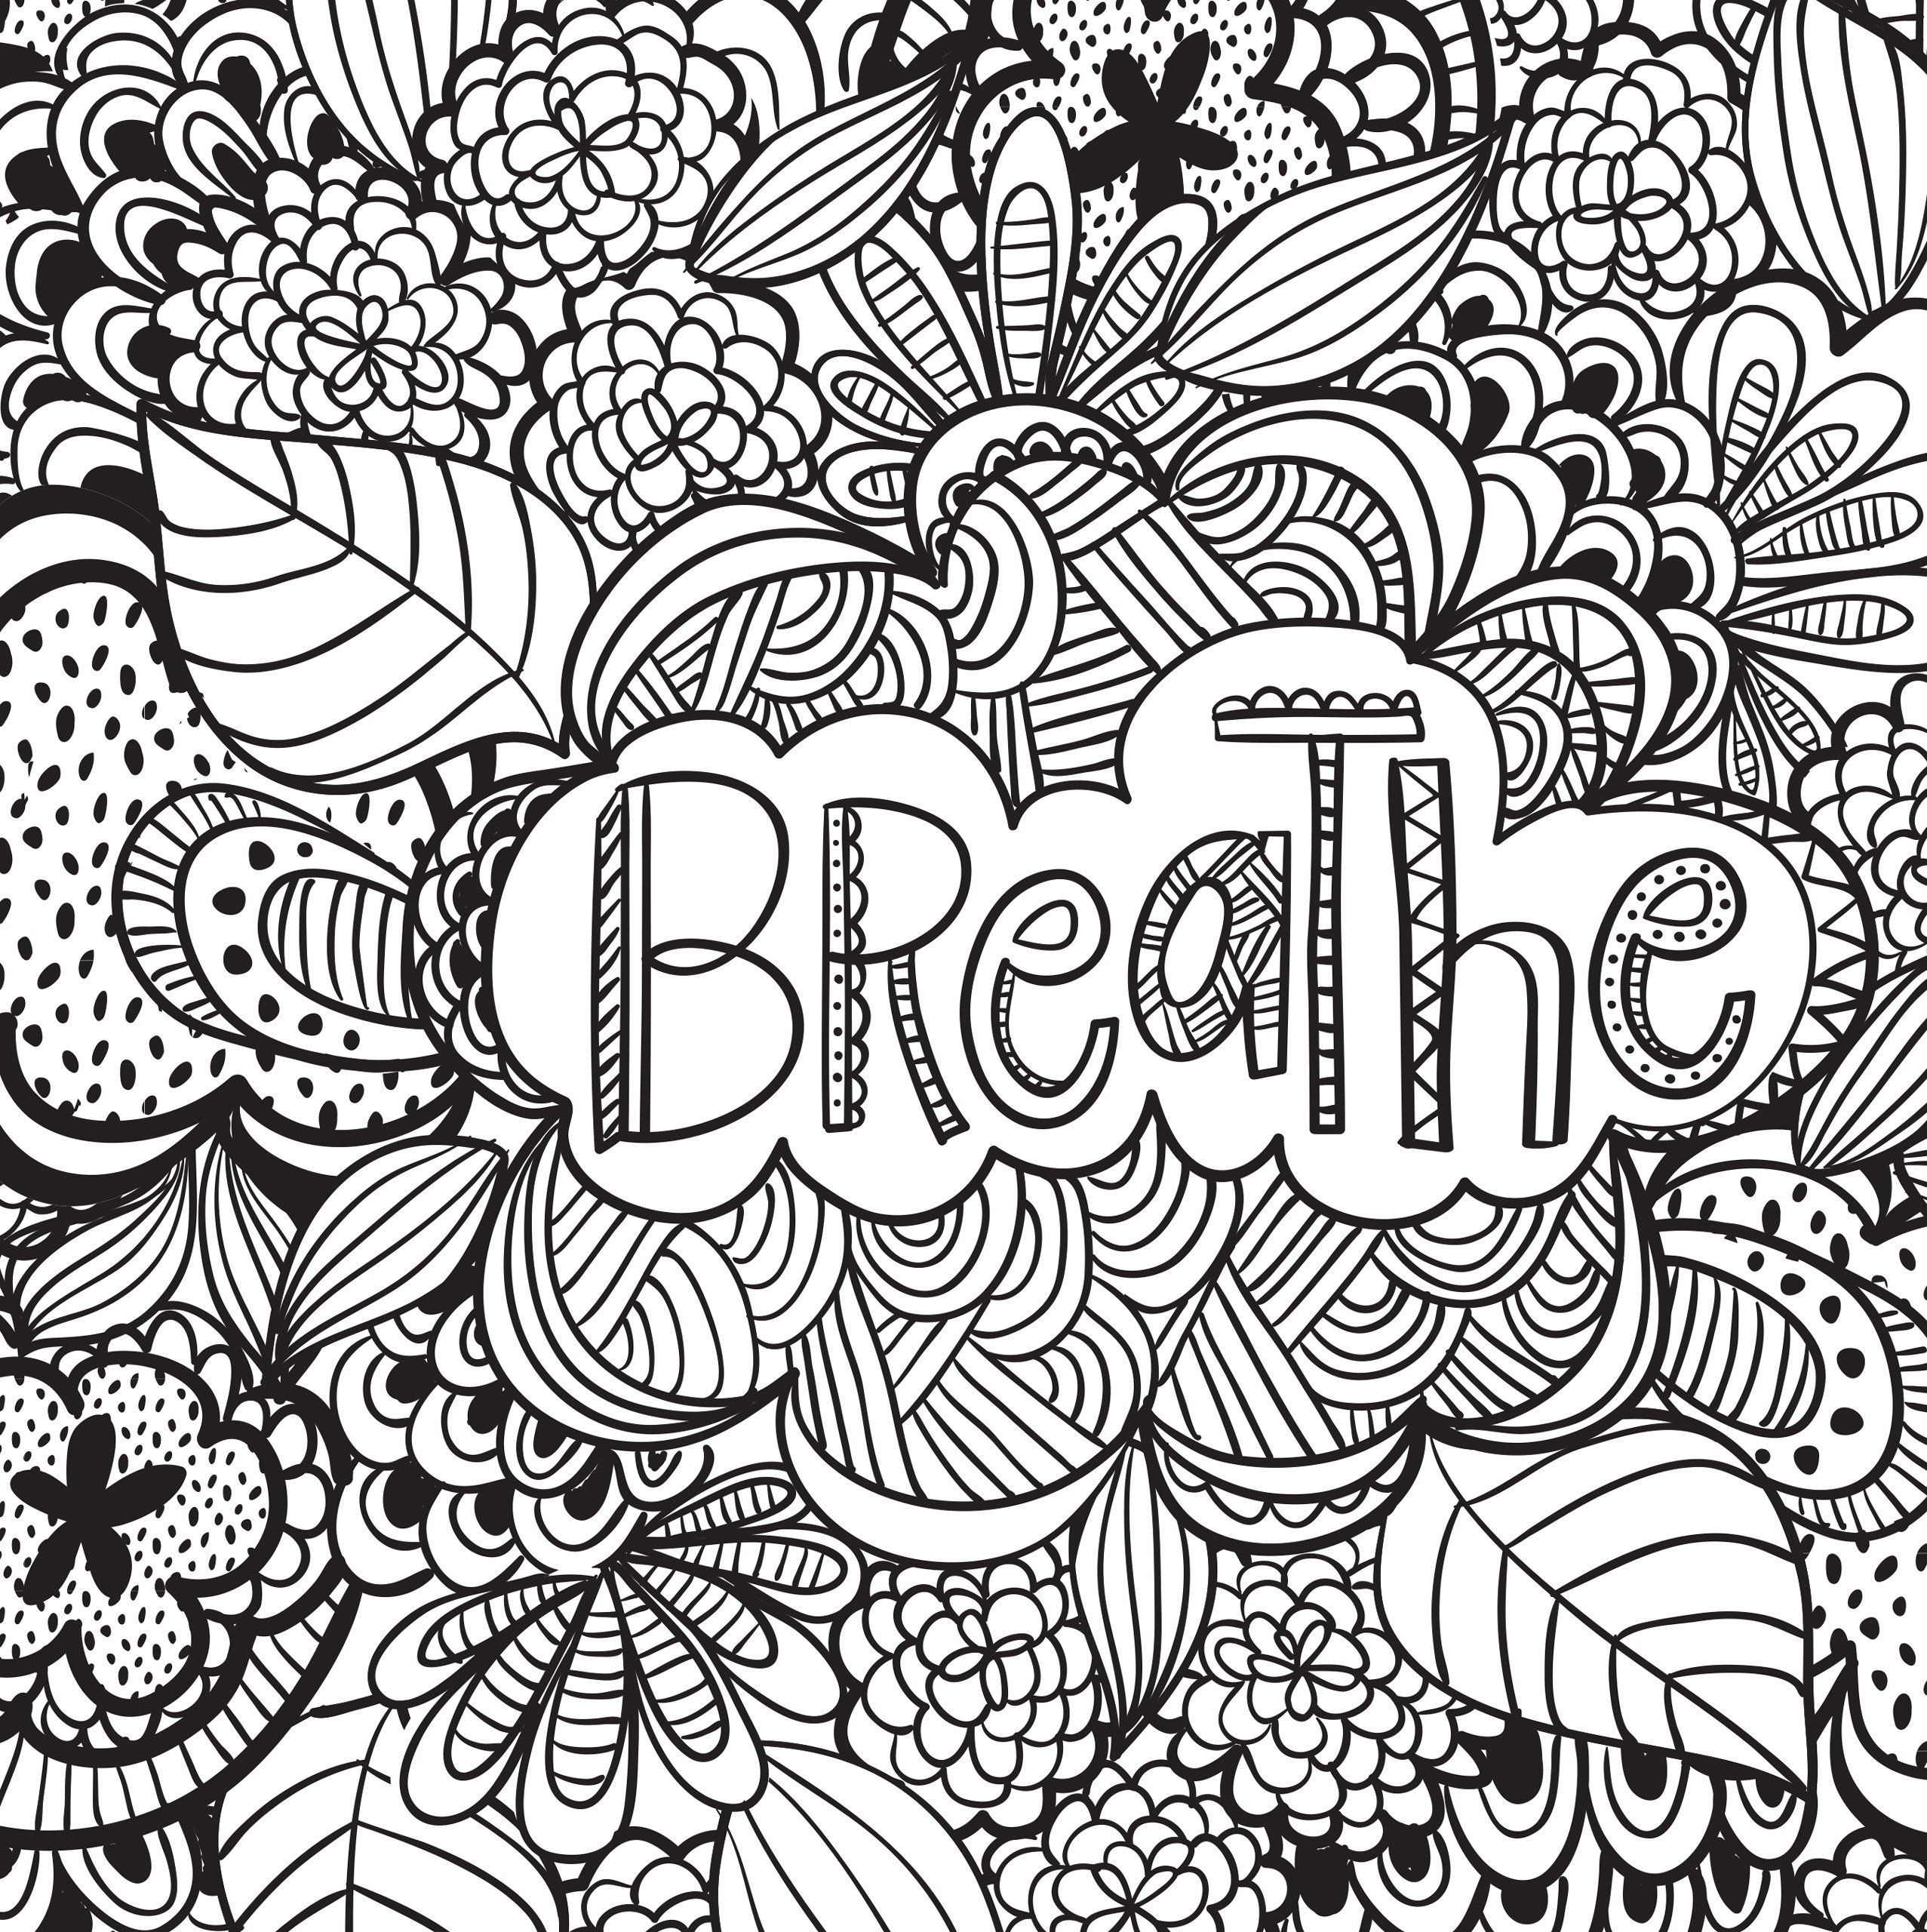 Stress Relief Coloring Pages Printable
 Joyful Inspiration Adult Coloring Book 31 stress